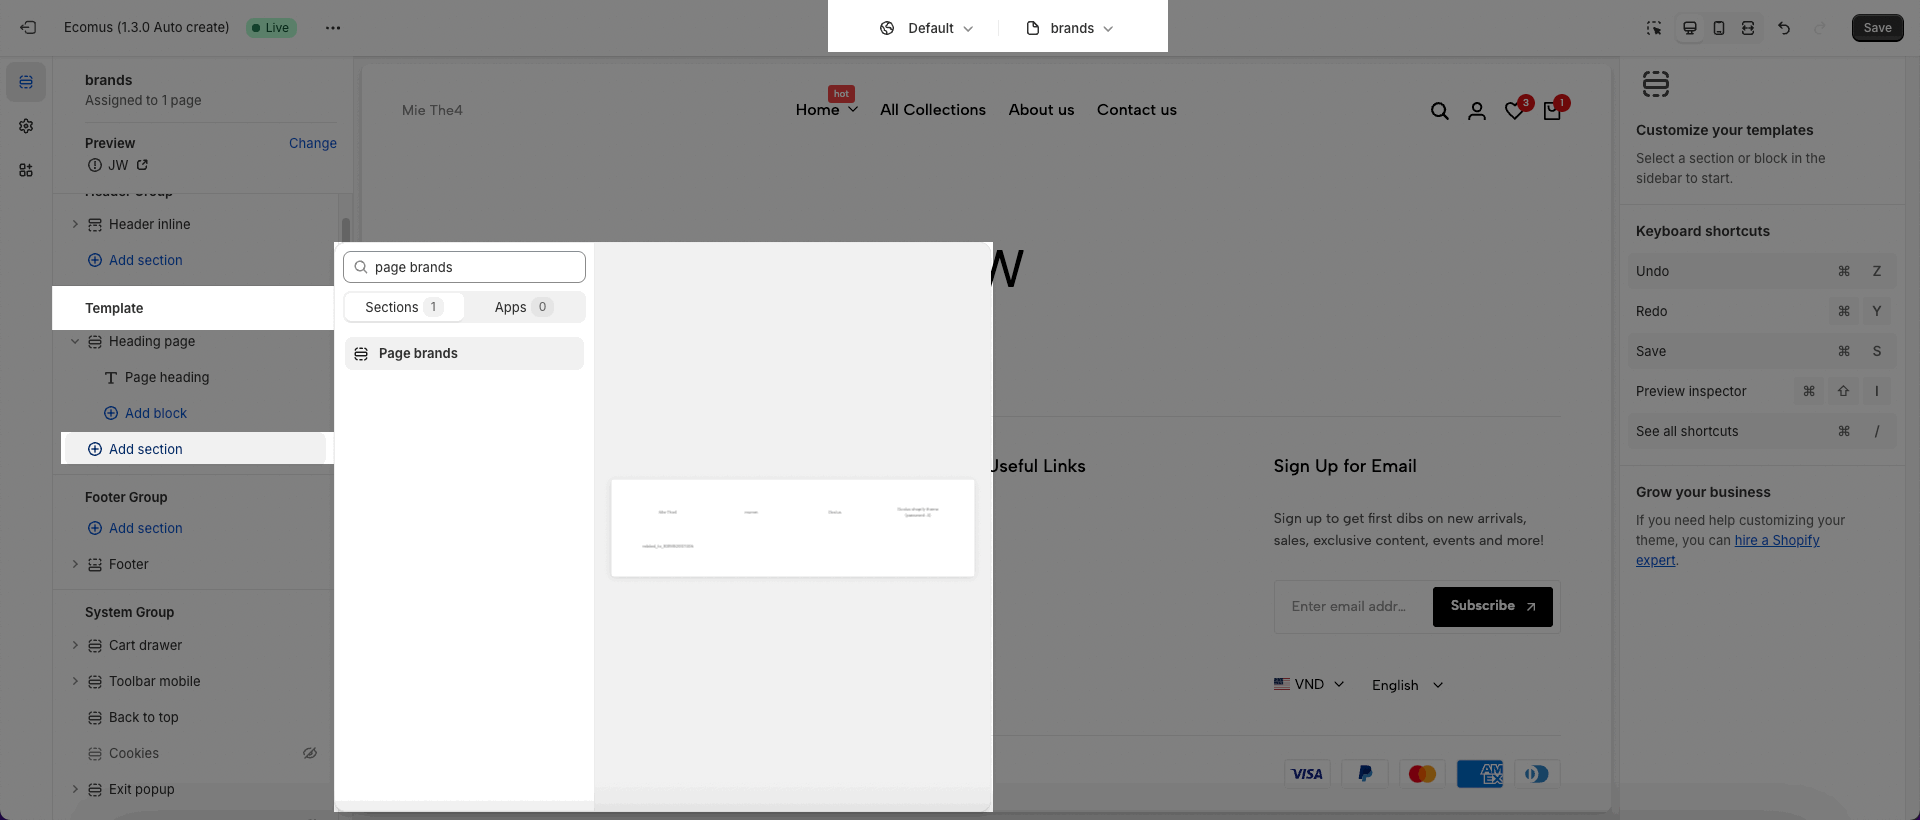 Page Brands section.gif